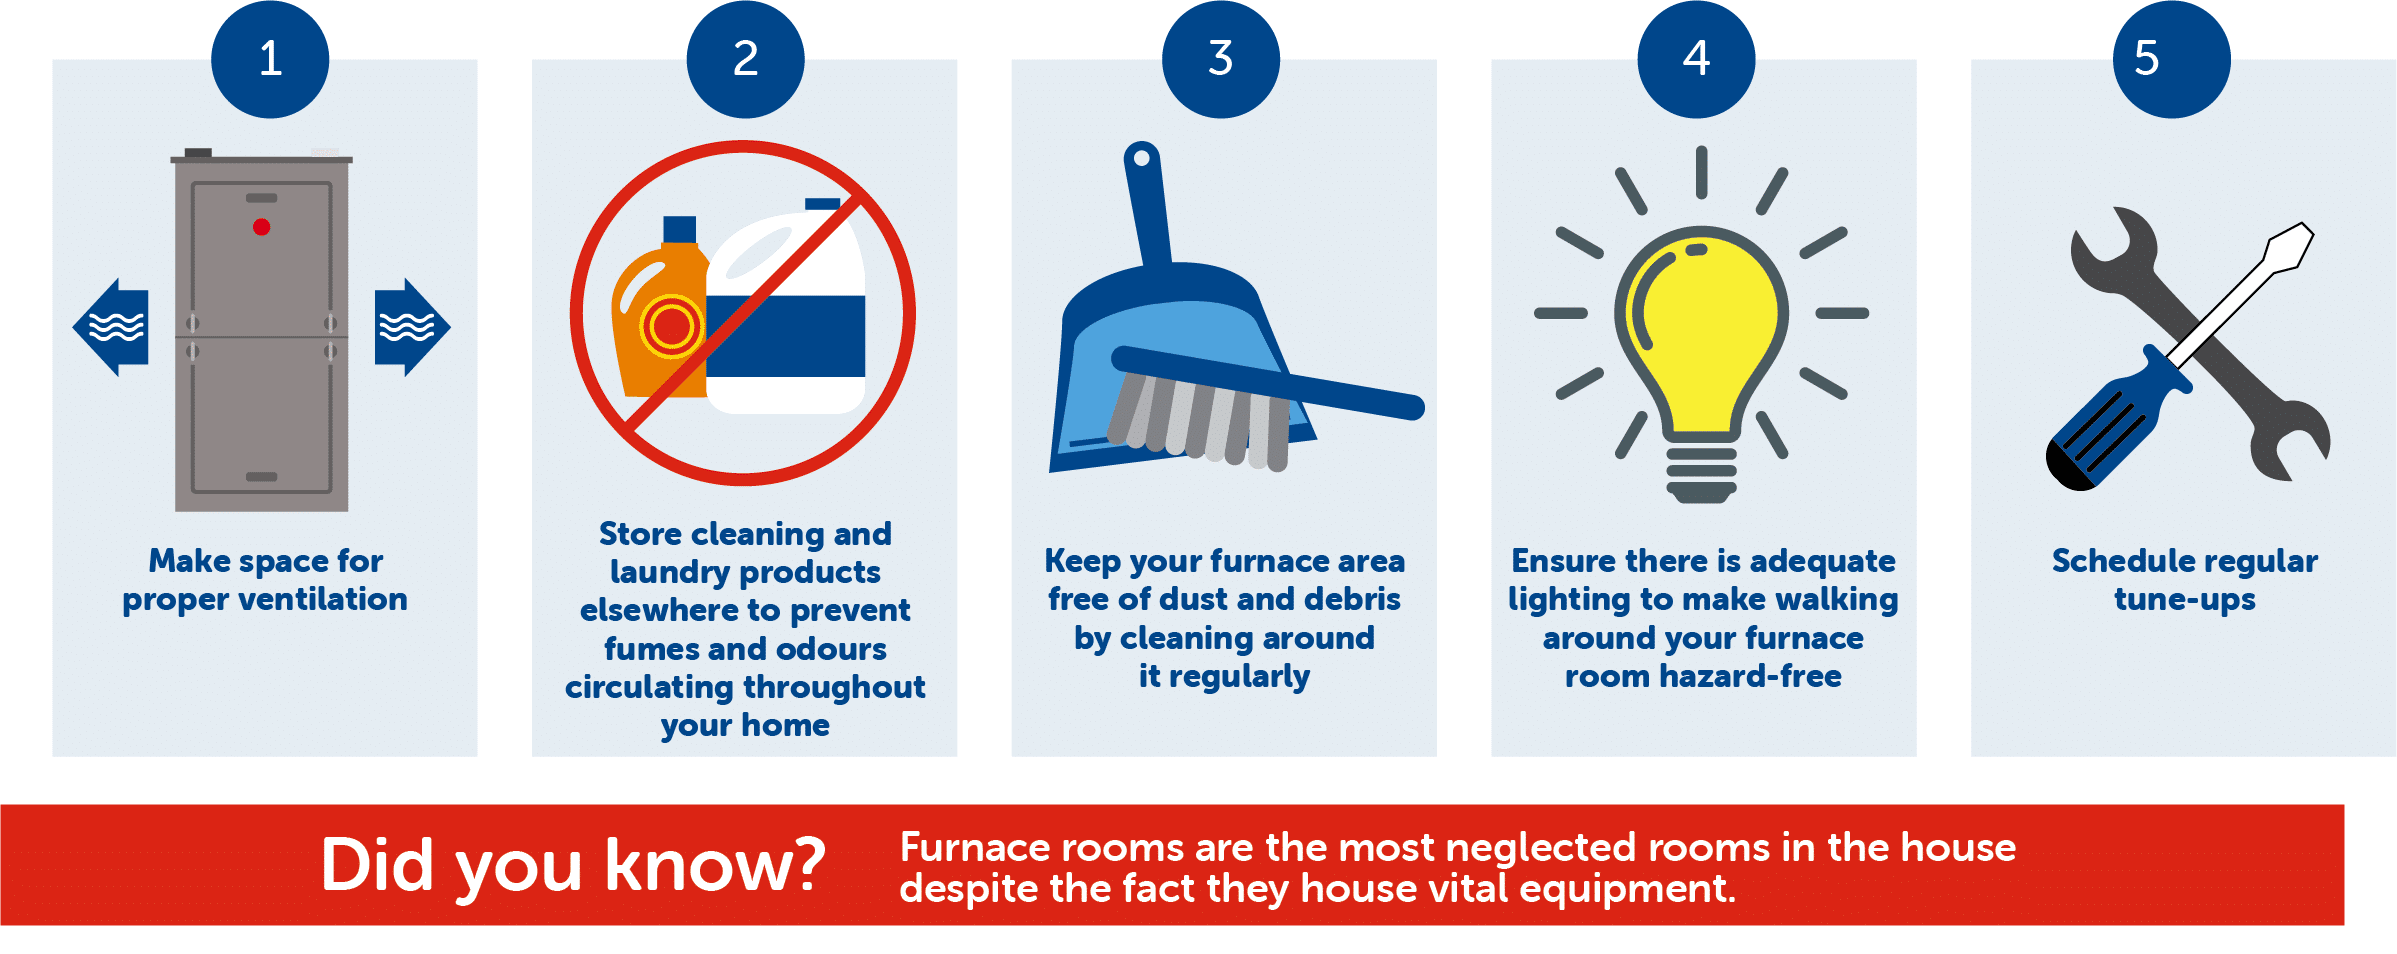 Furnace safety infographic